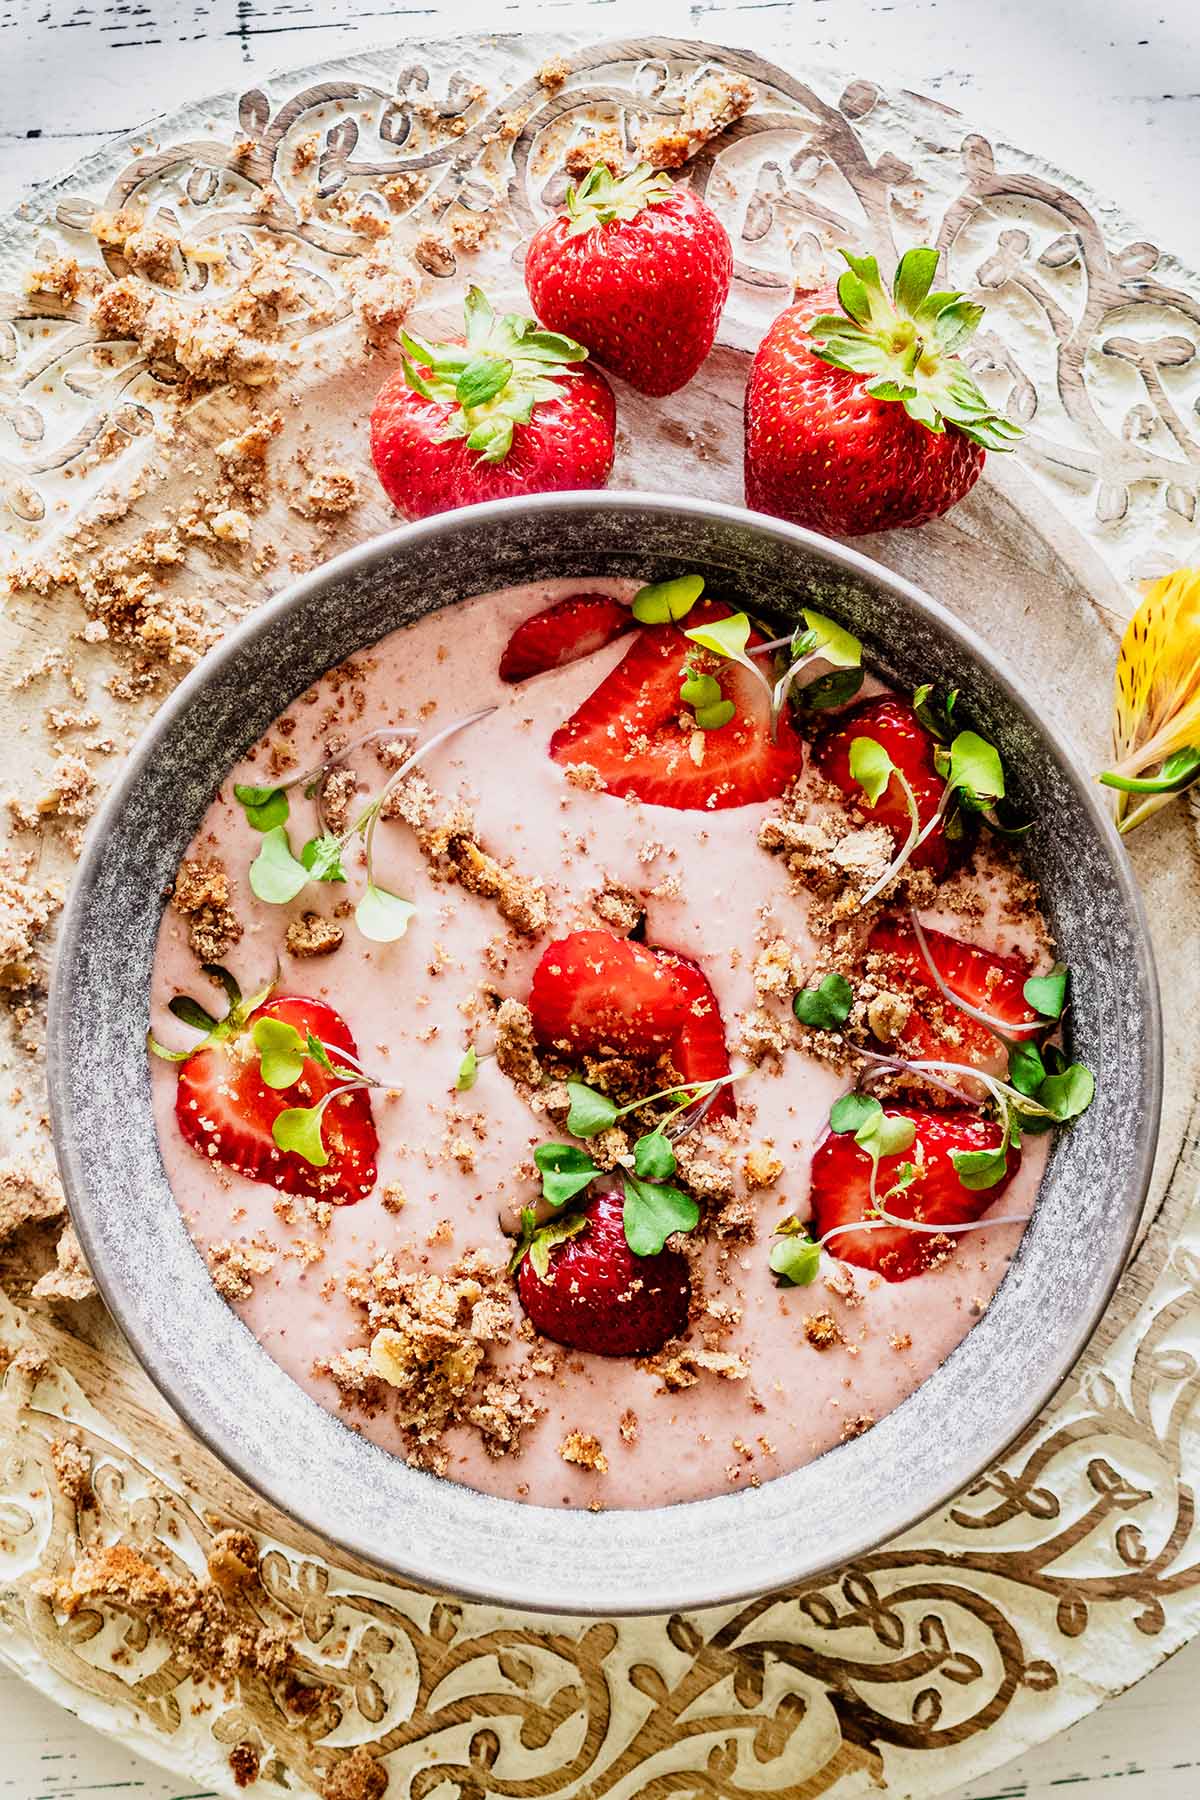 Strawberry banana smoothie bowl topped with sliced strawberries and micro greens in a grey bowl.